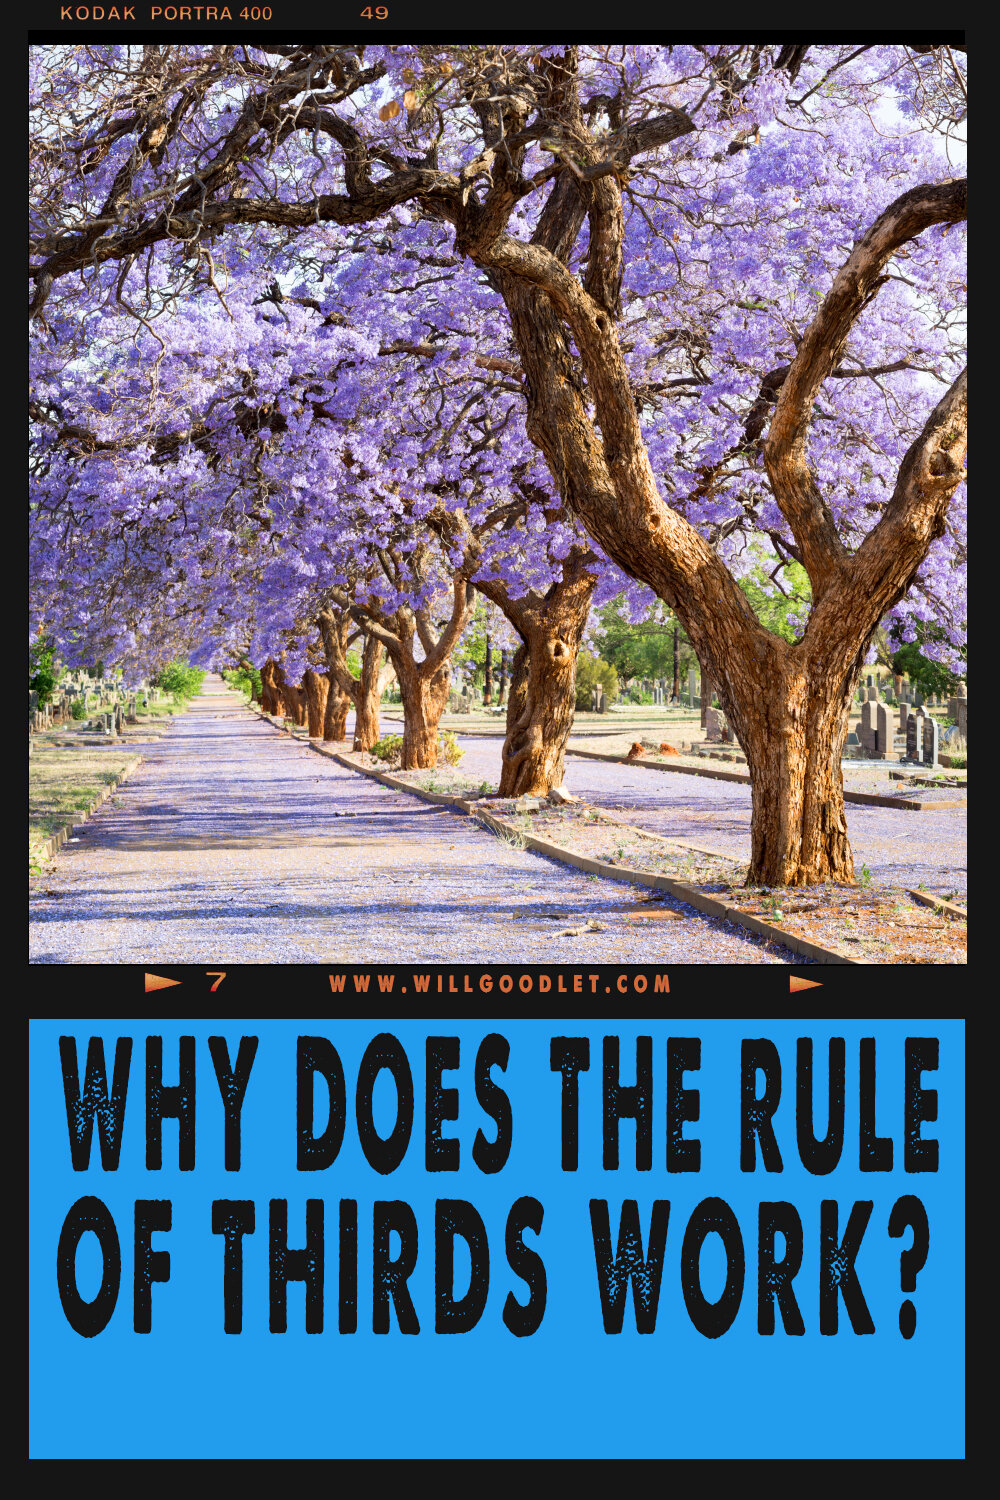 Why does the rule of thirds work?